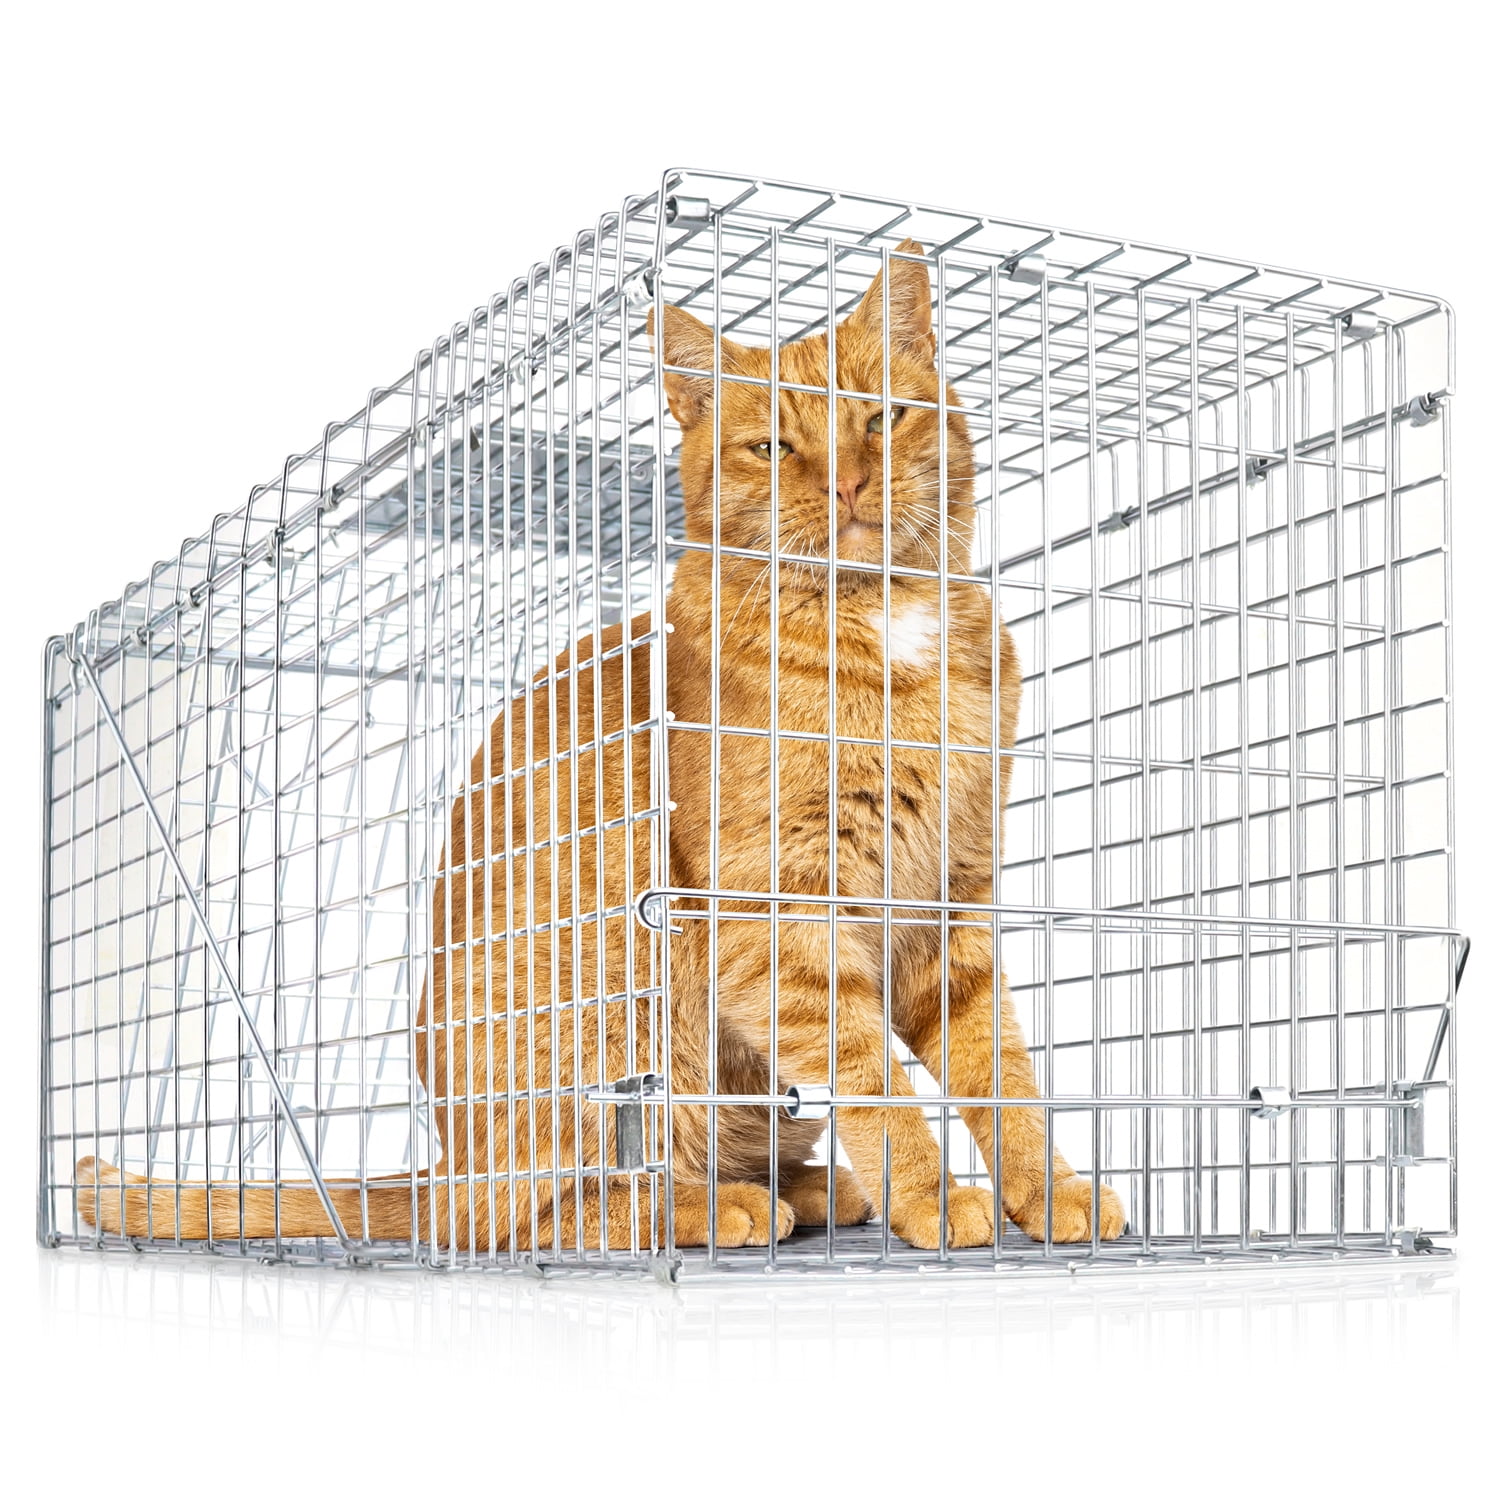 Trapping of feral cats using cage traps - PestSmart